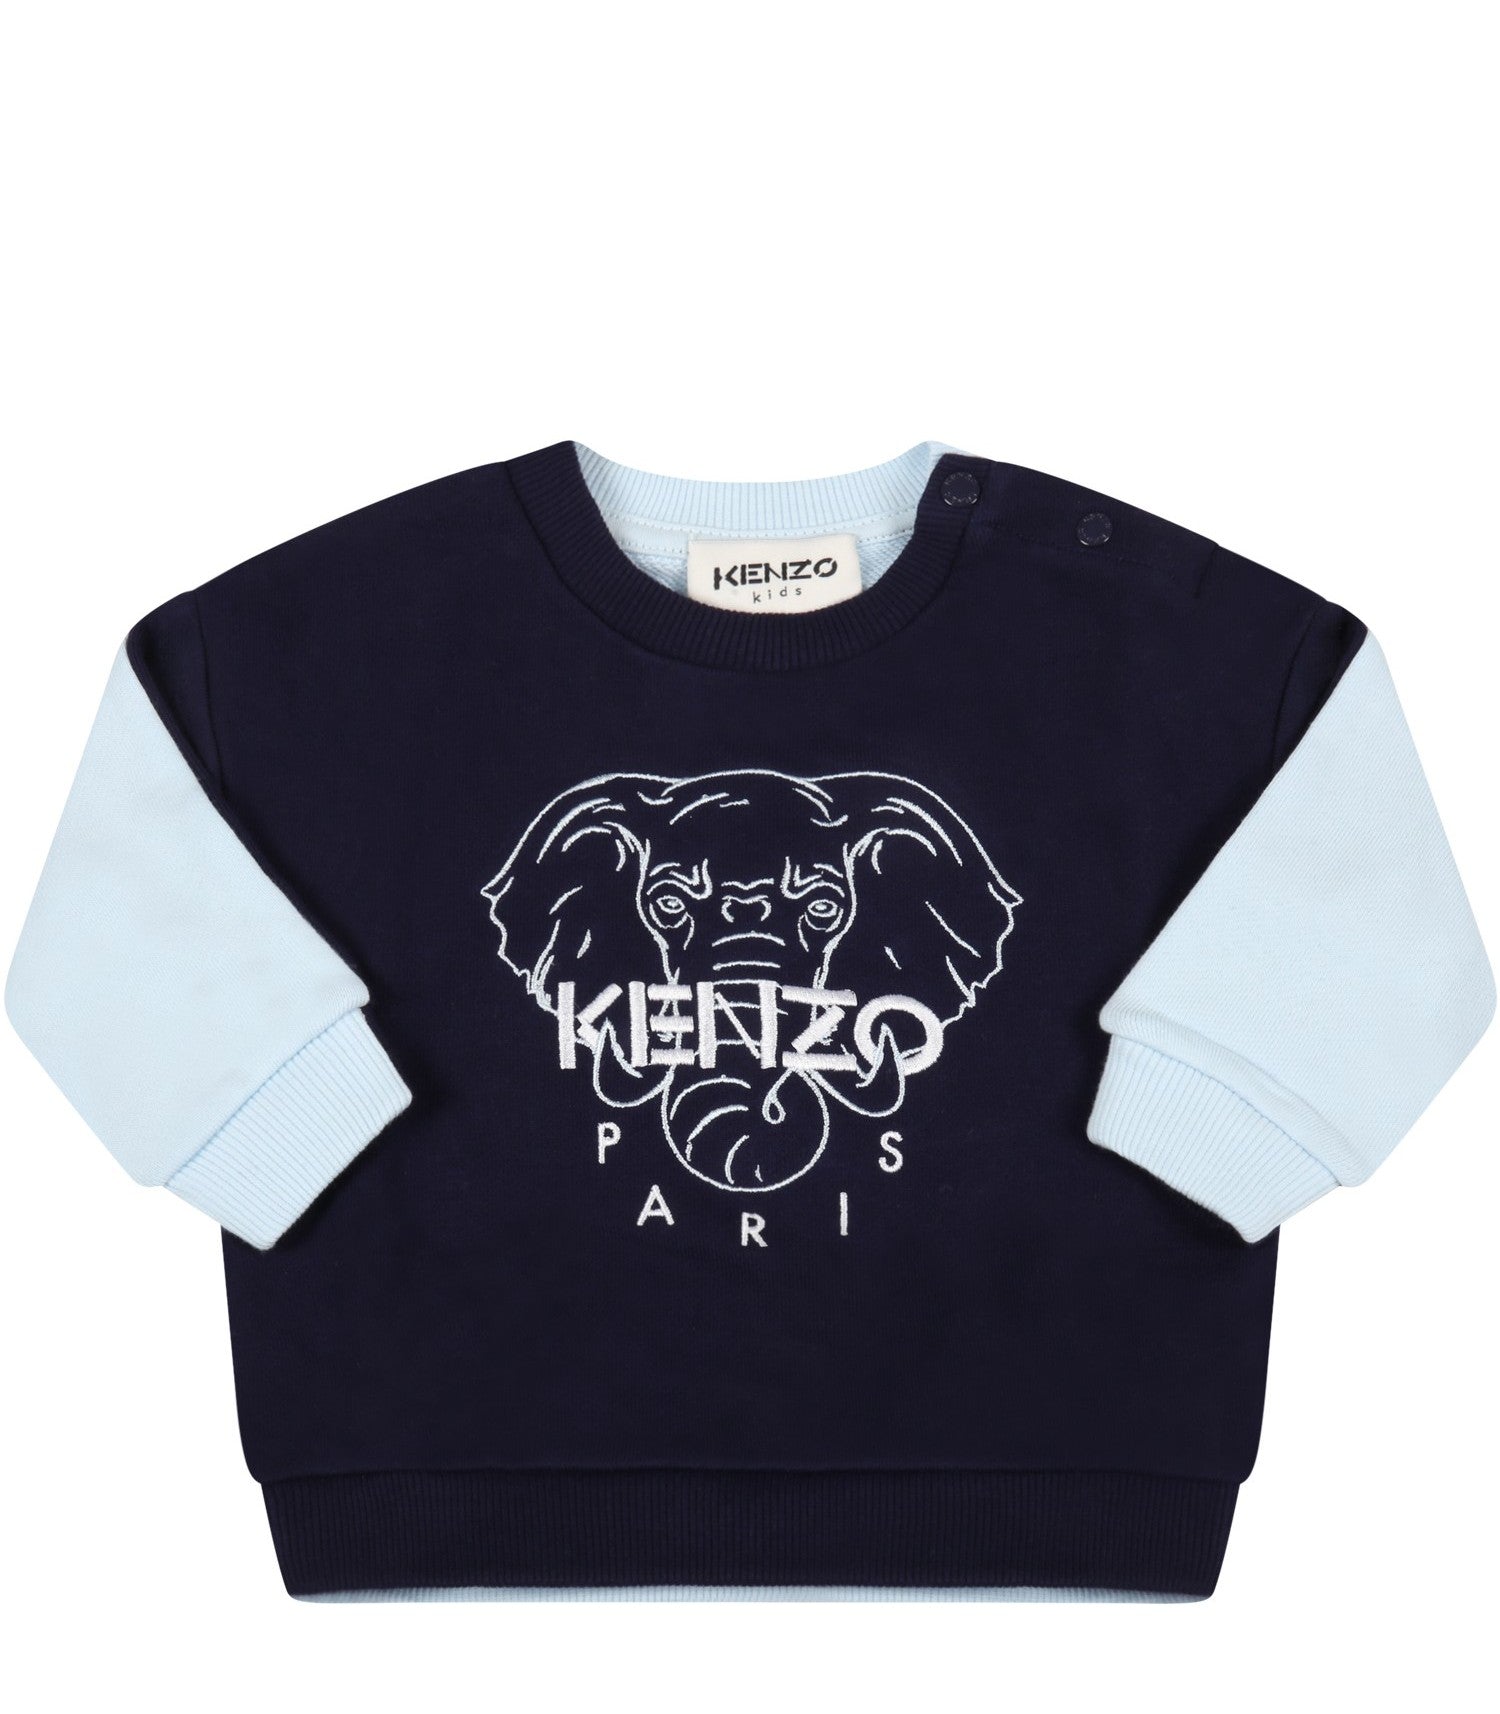 Kenzo Kid's Reversible Jogging Outfit - Color: Electric Blue - Kids Premium Clothing -